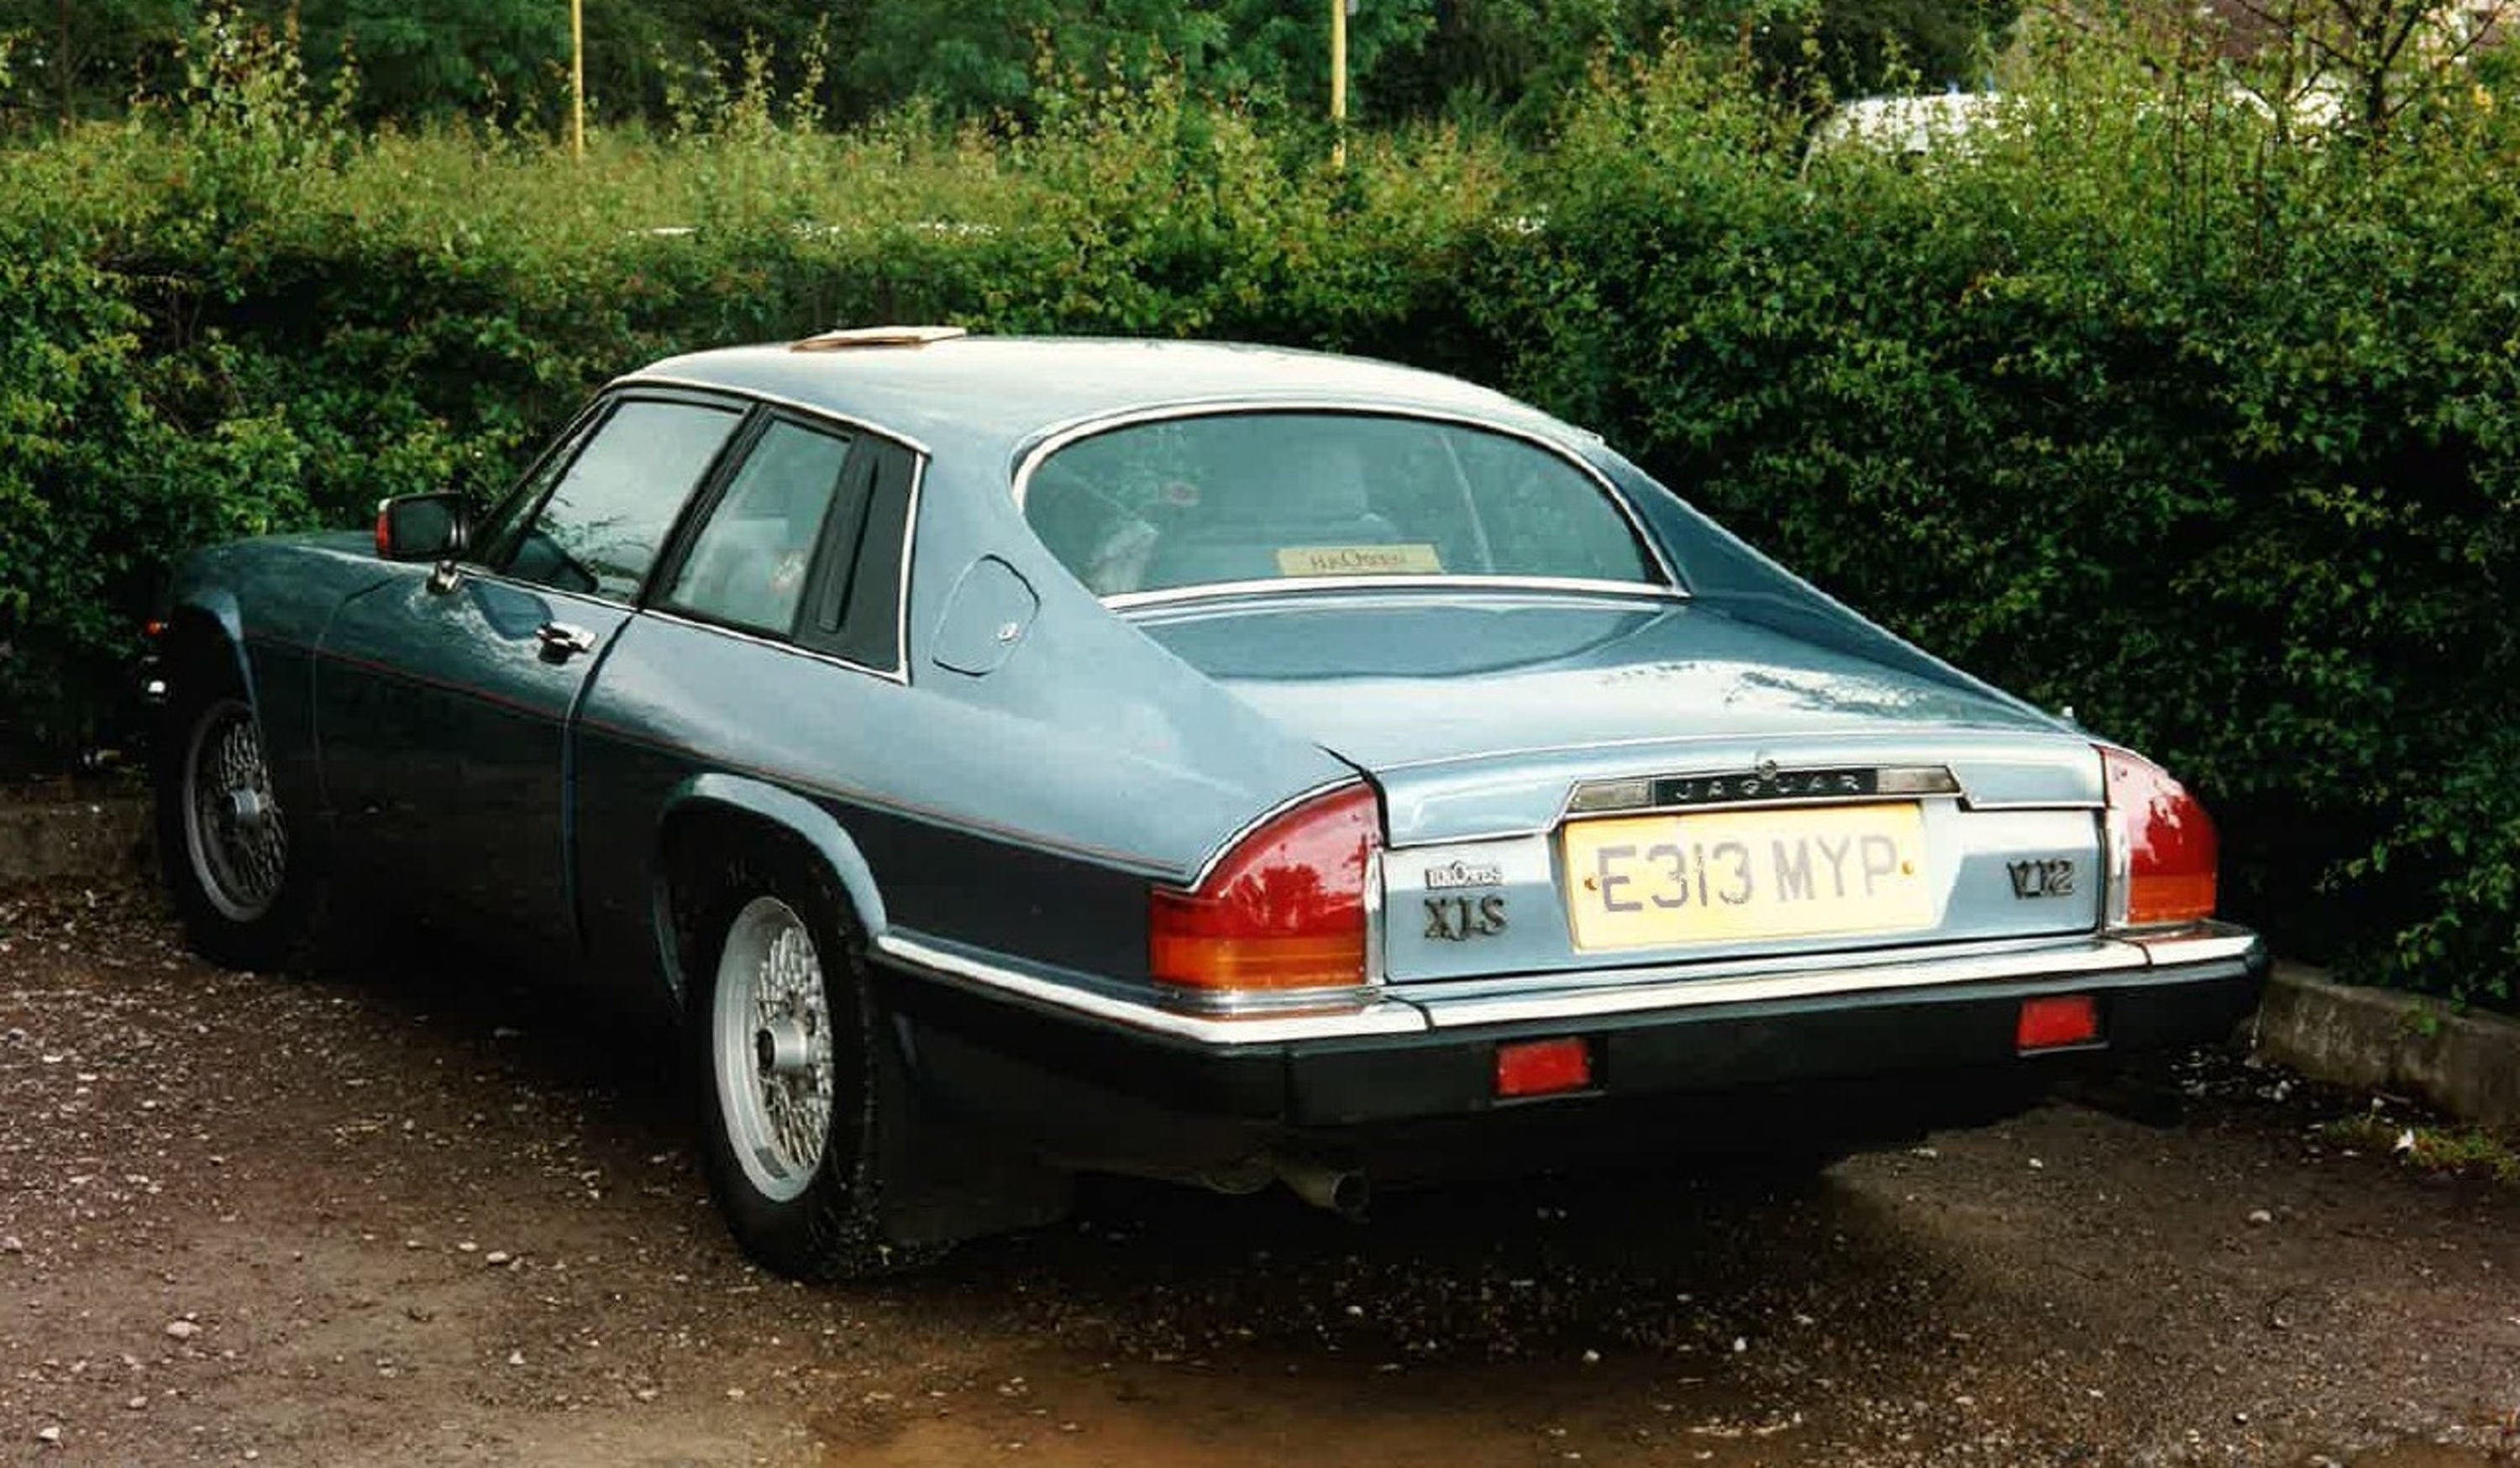 Penny Bell, 43, was found dead in the driver’s seat of her powder blue Jaguar XJS